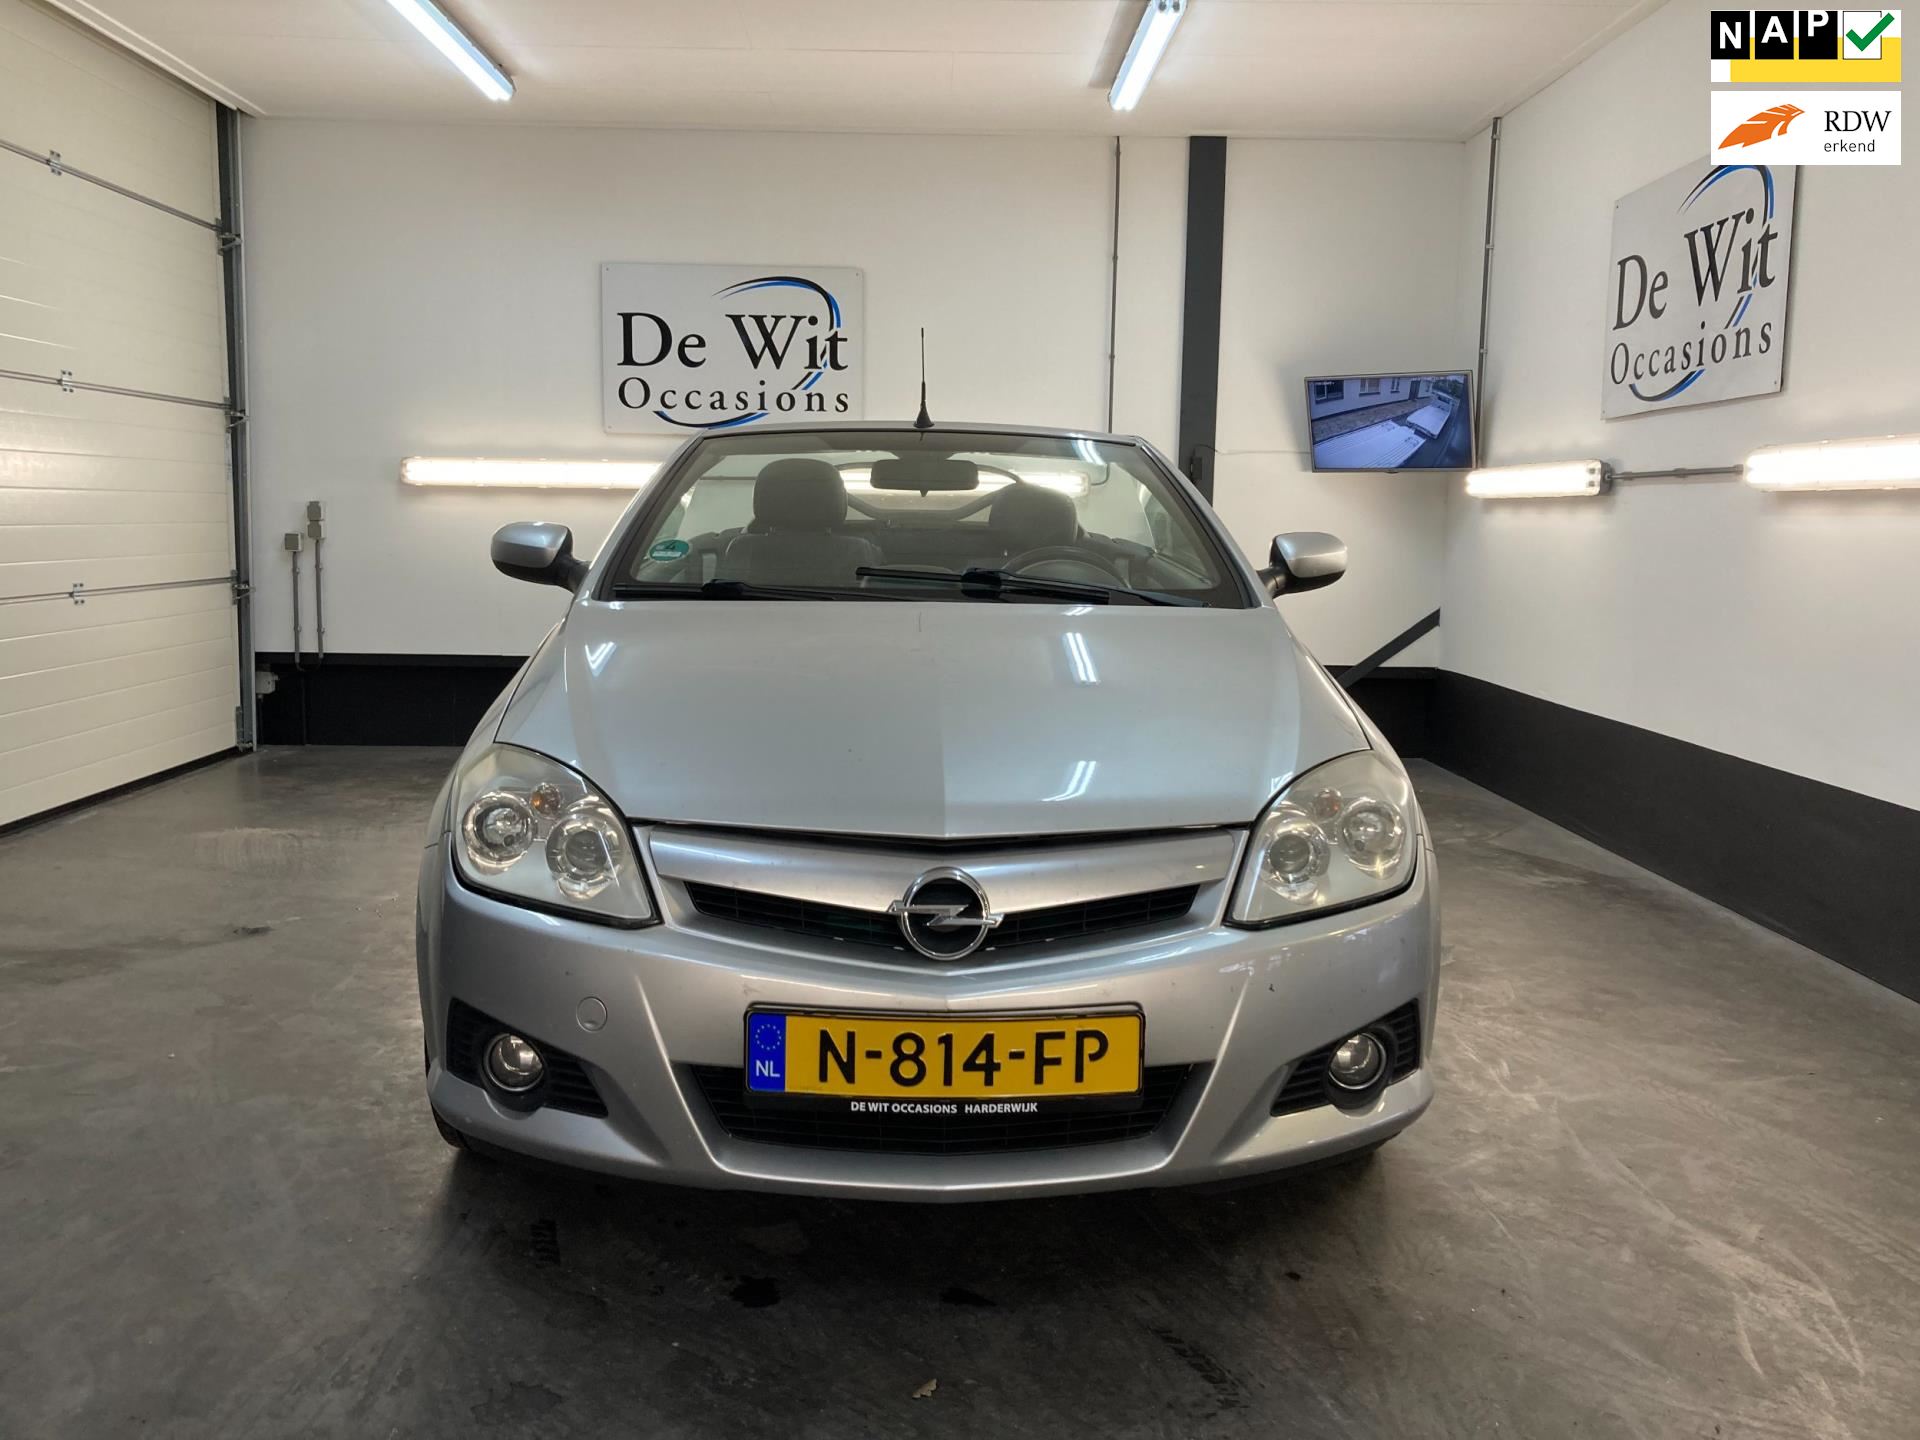 Opel Tigra TwinTop occasion - De Wit Occasions